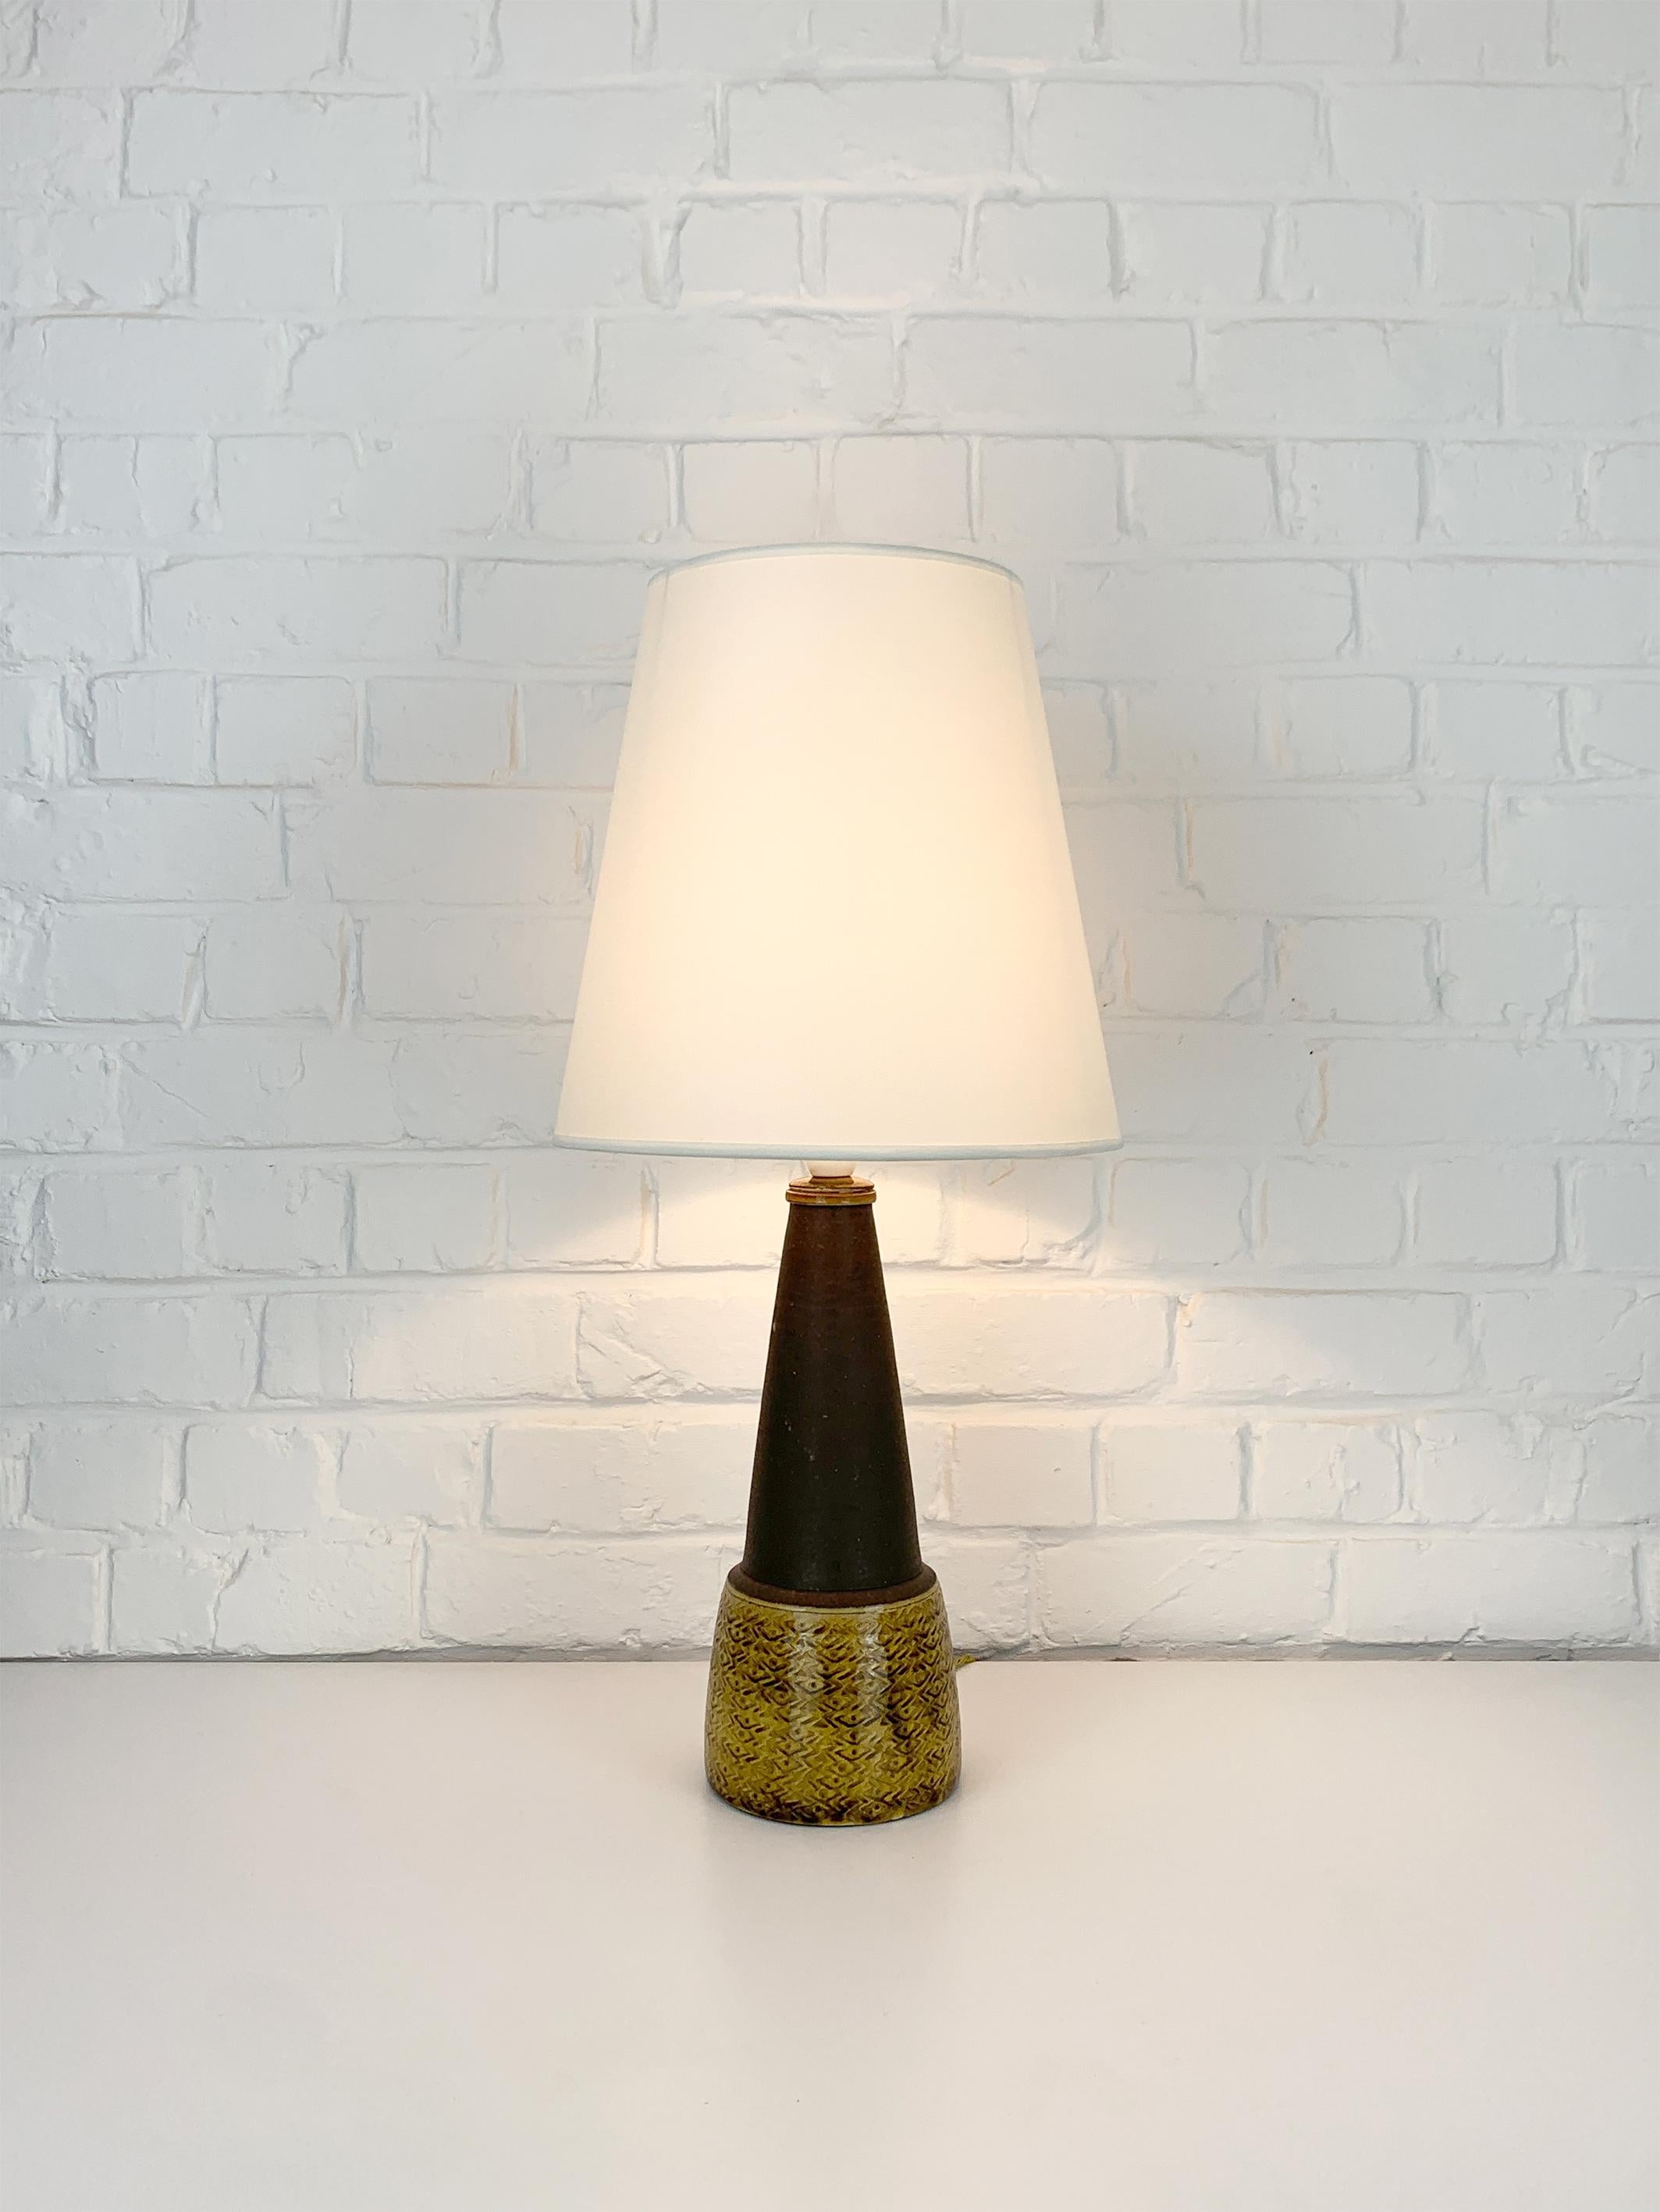 Stoneware table lamp in brown and uranium yellow glaze, designed by Nils Kähler in the 1960s. Manufactured by the workshop of Herman A. Kähler Ceramic (HAK) in the town of Naestved in southern Denmark.
Nils Kähler was the fourth generation of the